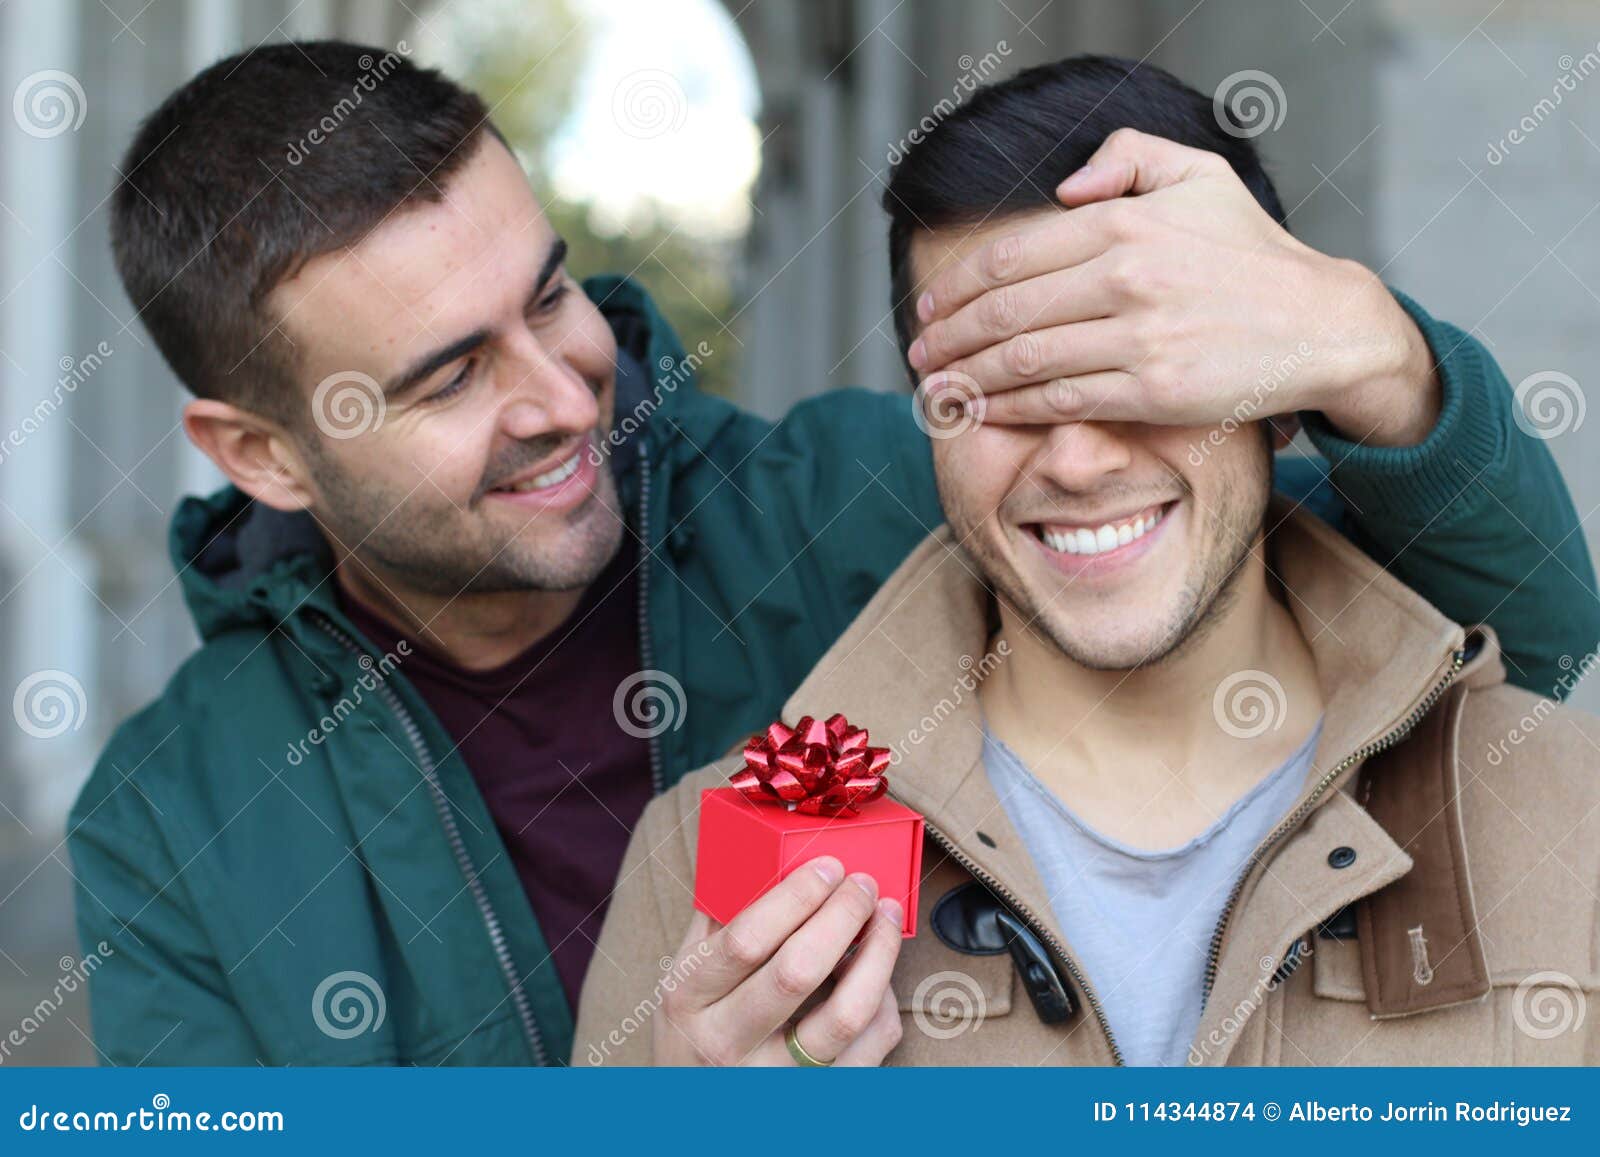 Lovely Same Sex Couple Sharing Affection Stock Photo Image Of Friend